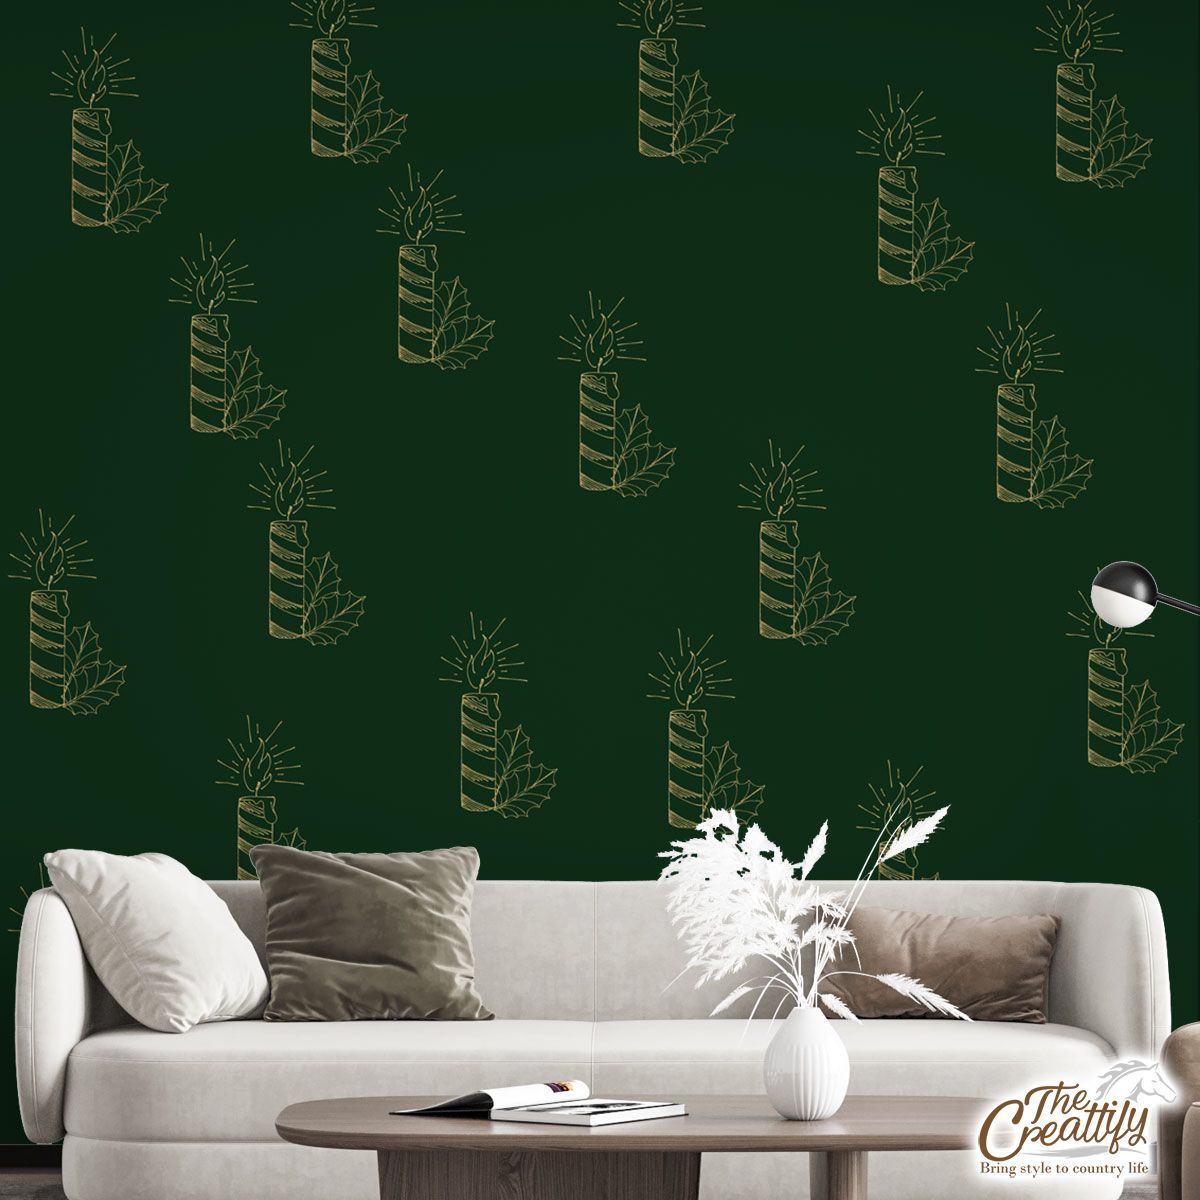 Gold And Green Christmas Candle With Holly Leaf Wall Mural